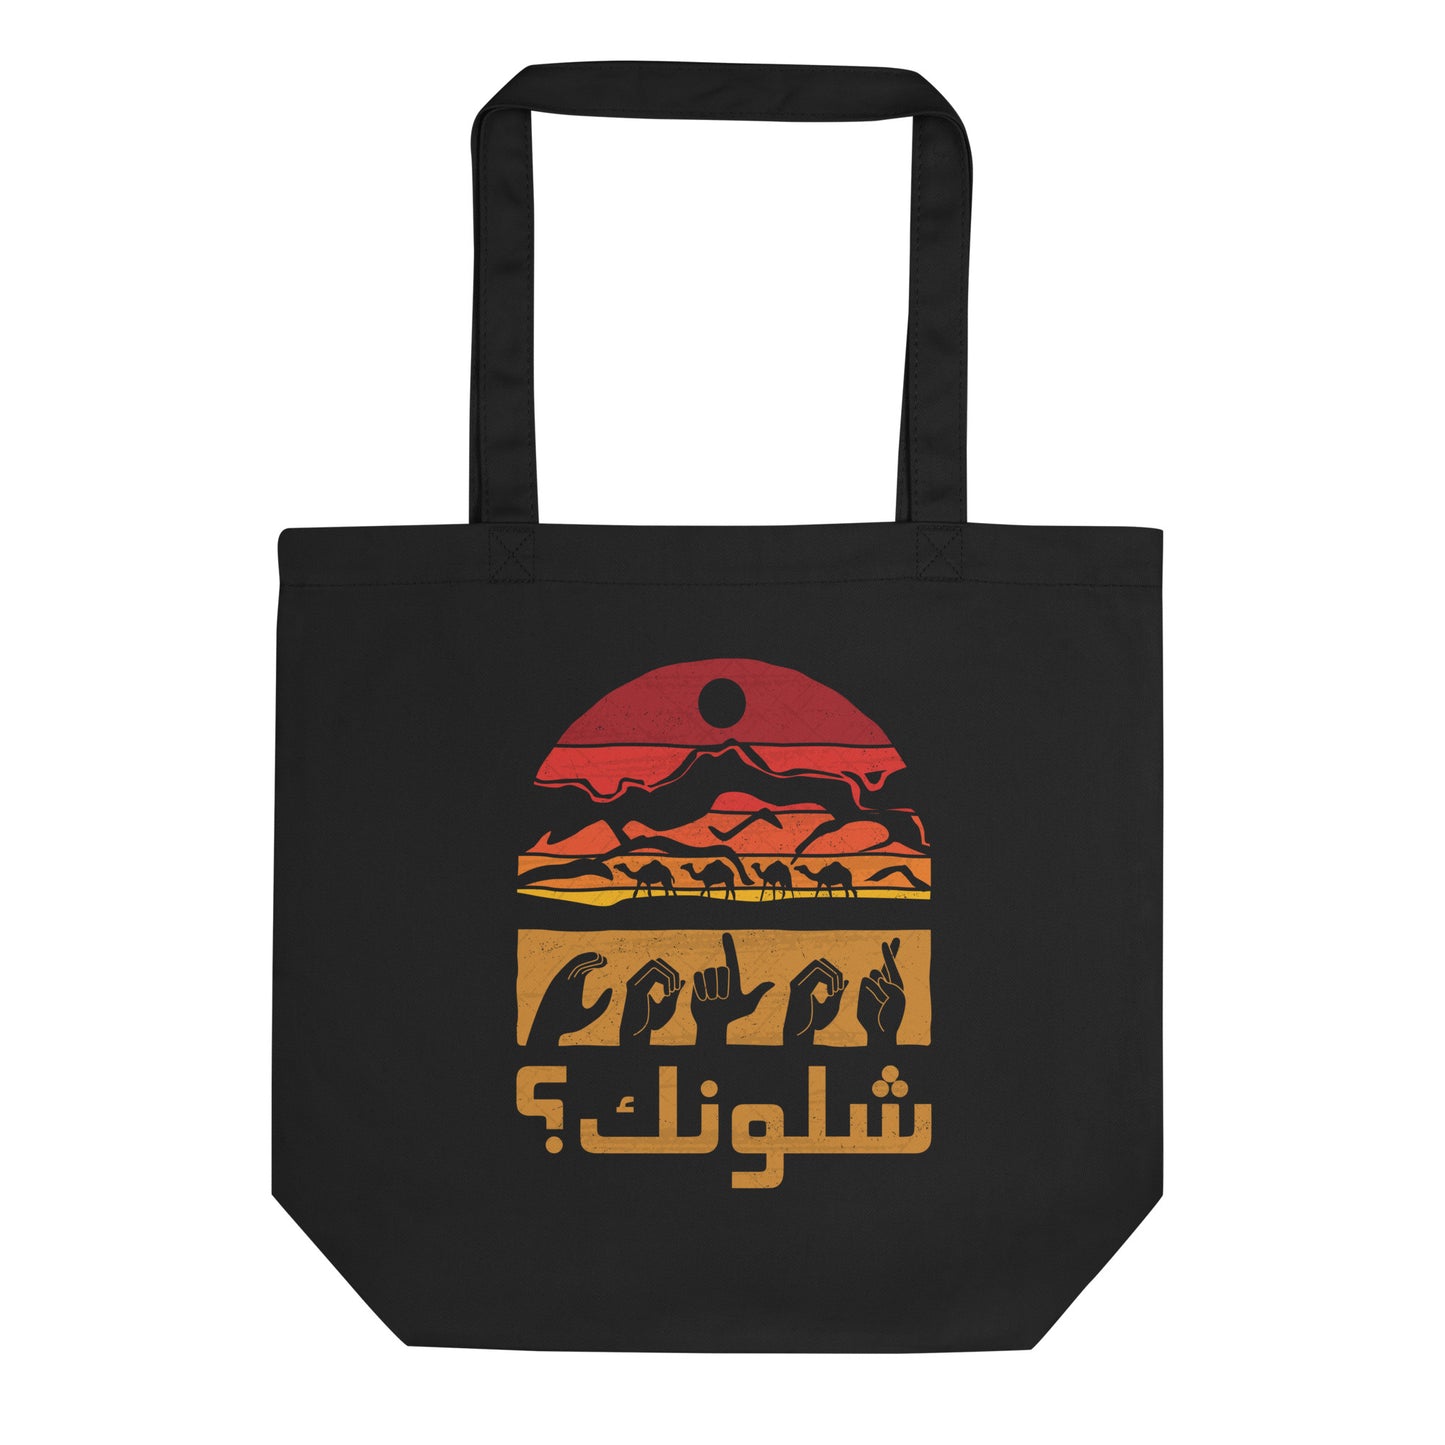 How are you? - Iraqi Funny Word ARV3 Eco Tote Bag